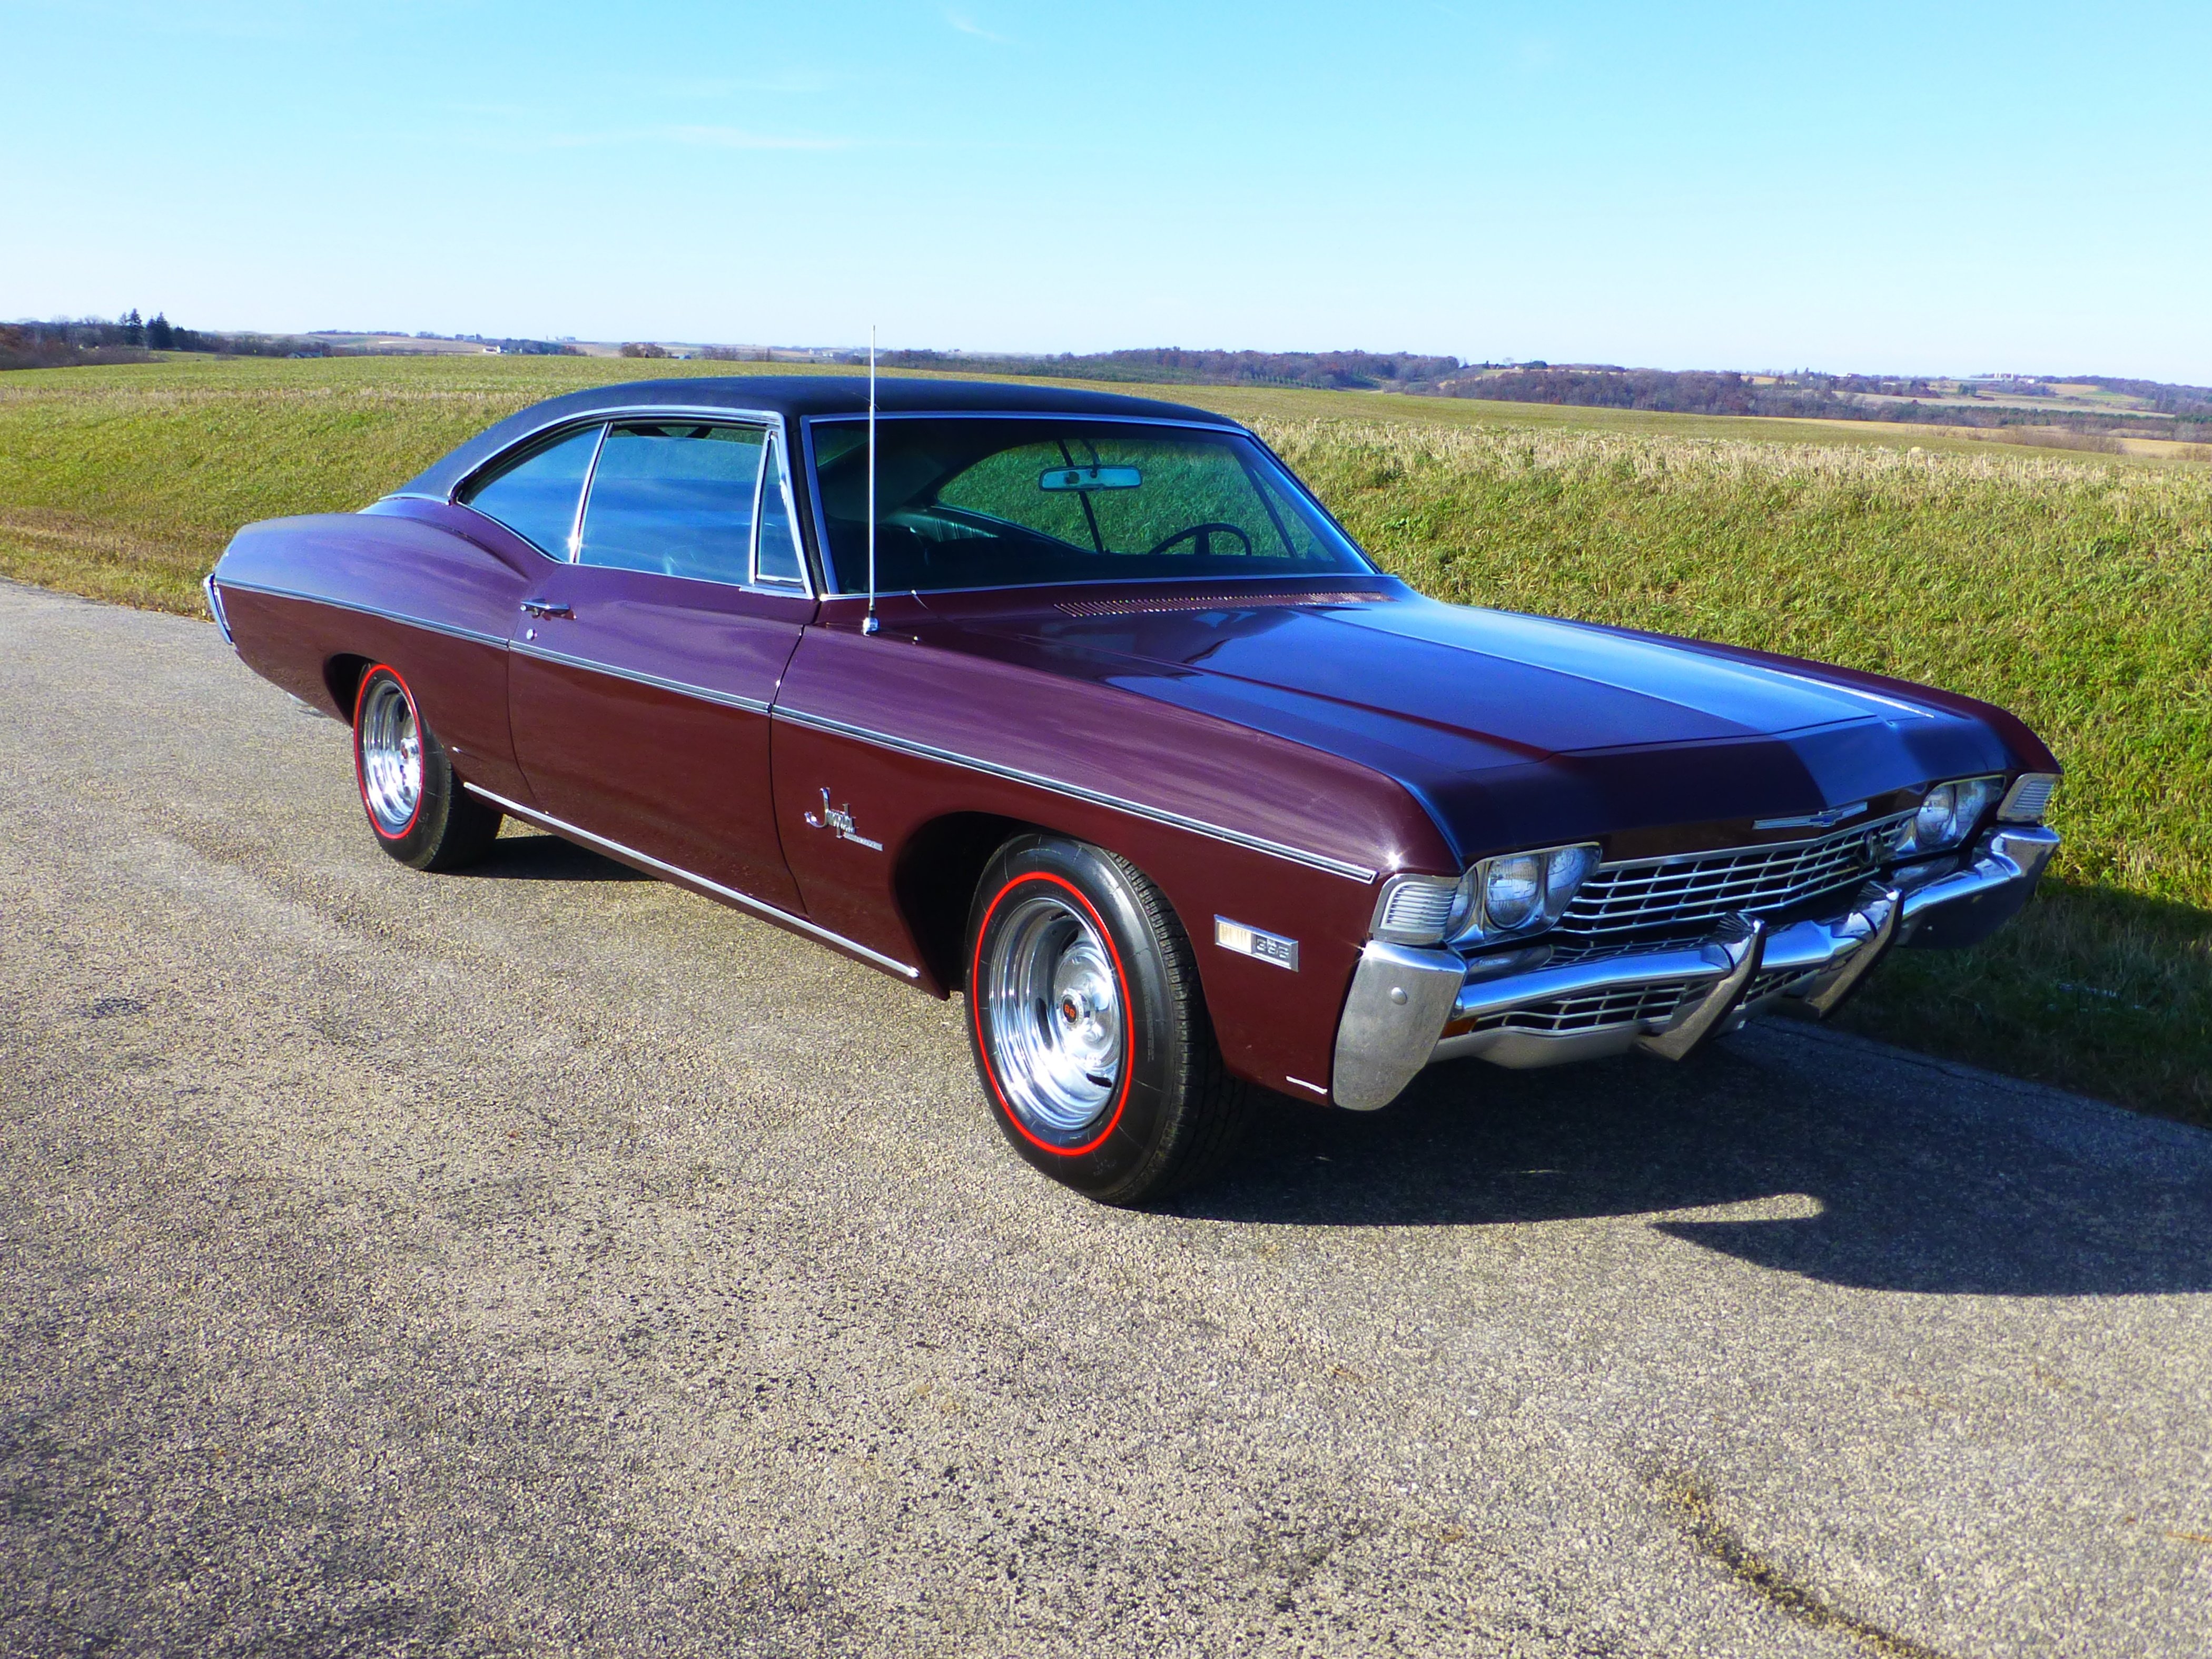 1968, Chevrolet, Impala, Ss, Coupe, Hardtop, Muscle, Classic, Usa, 4200x3150 01 Wallpaper